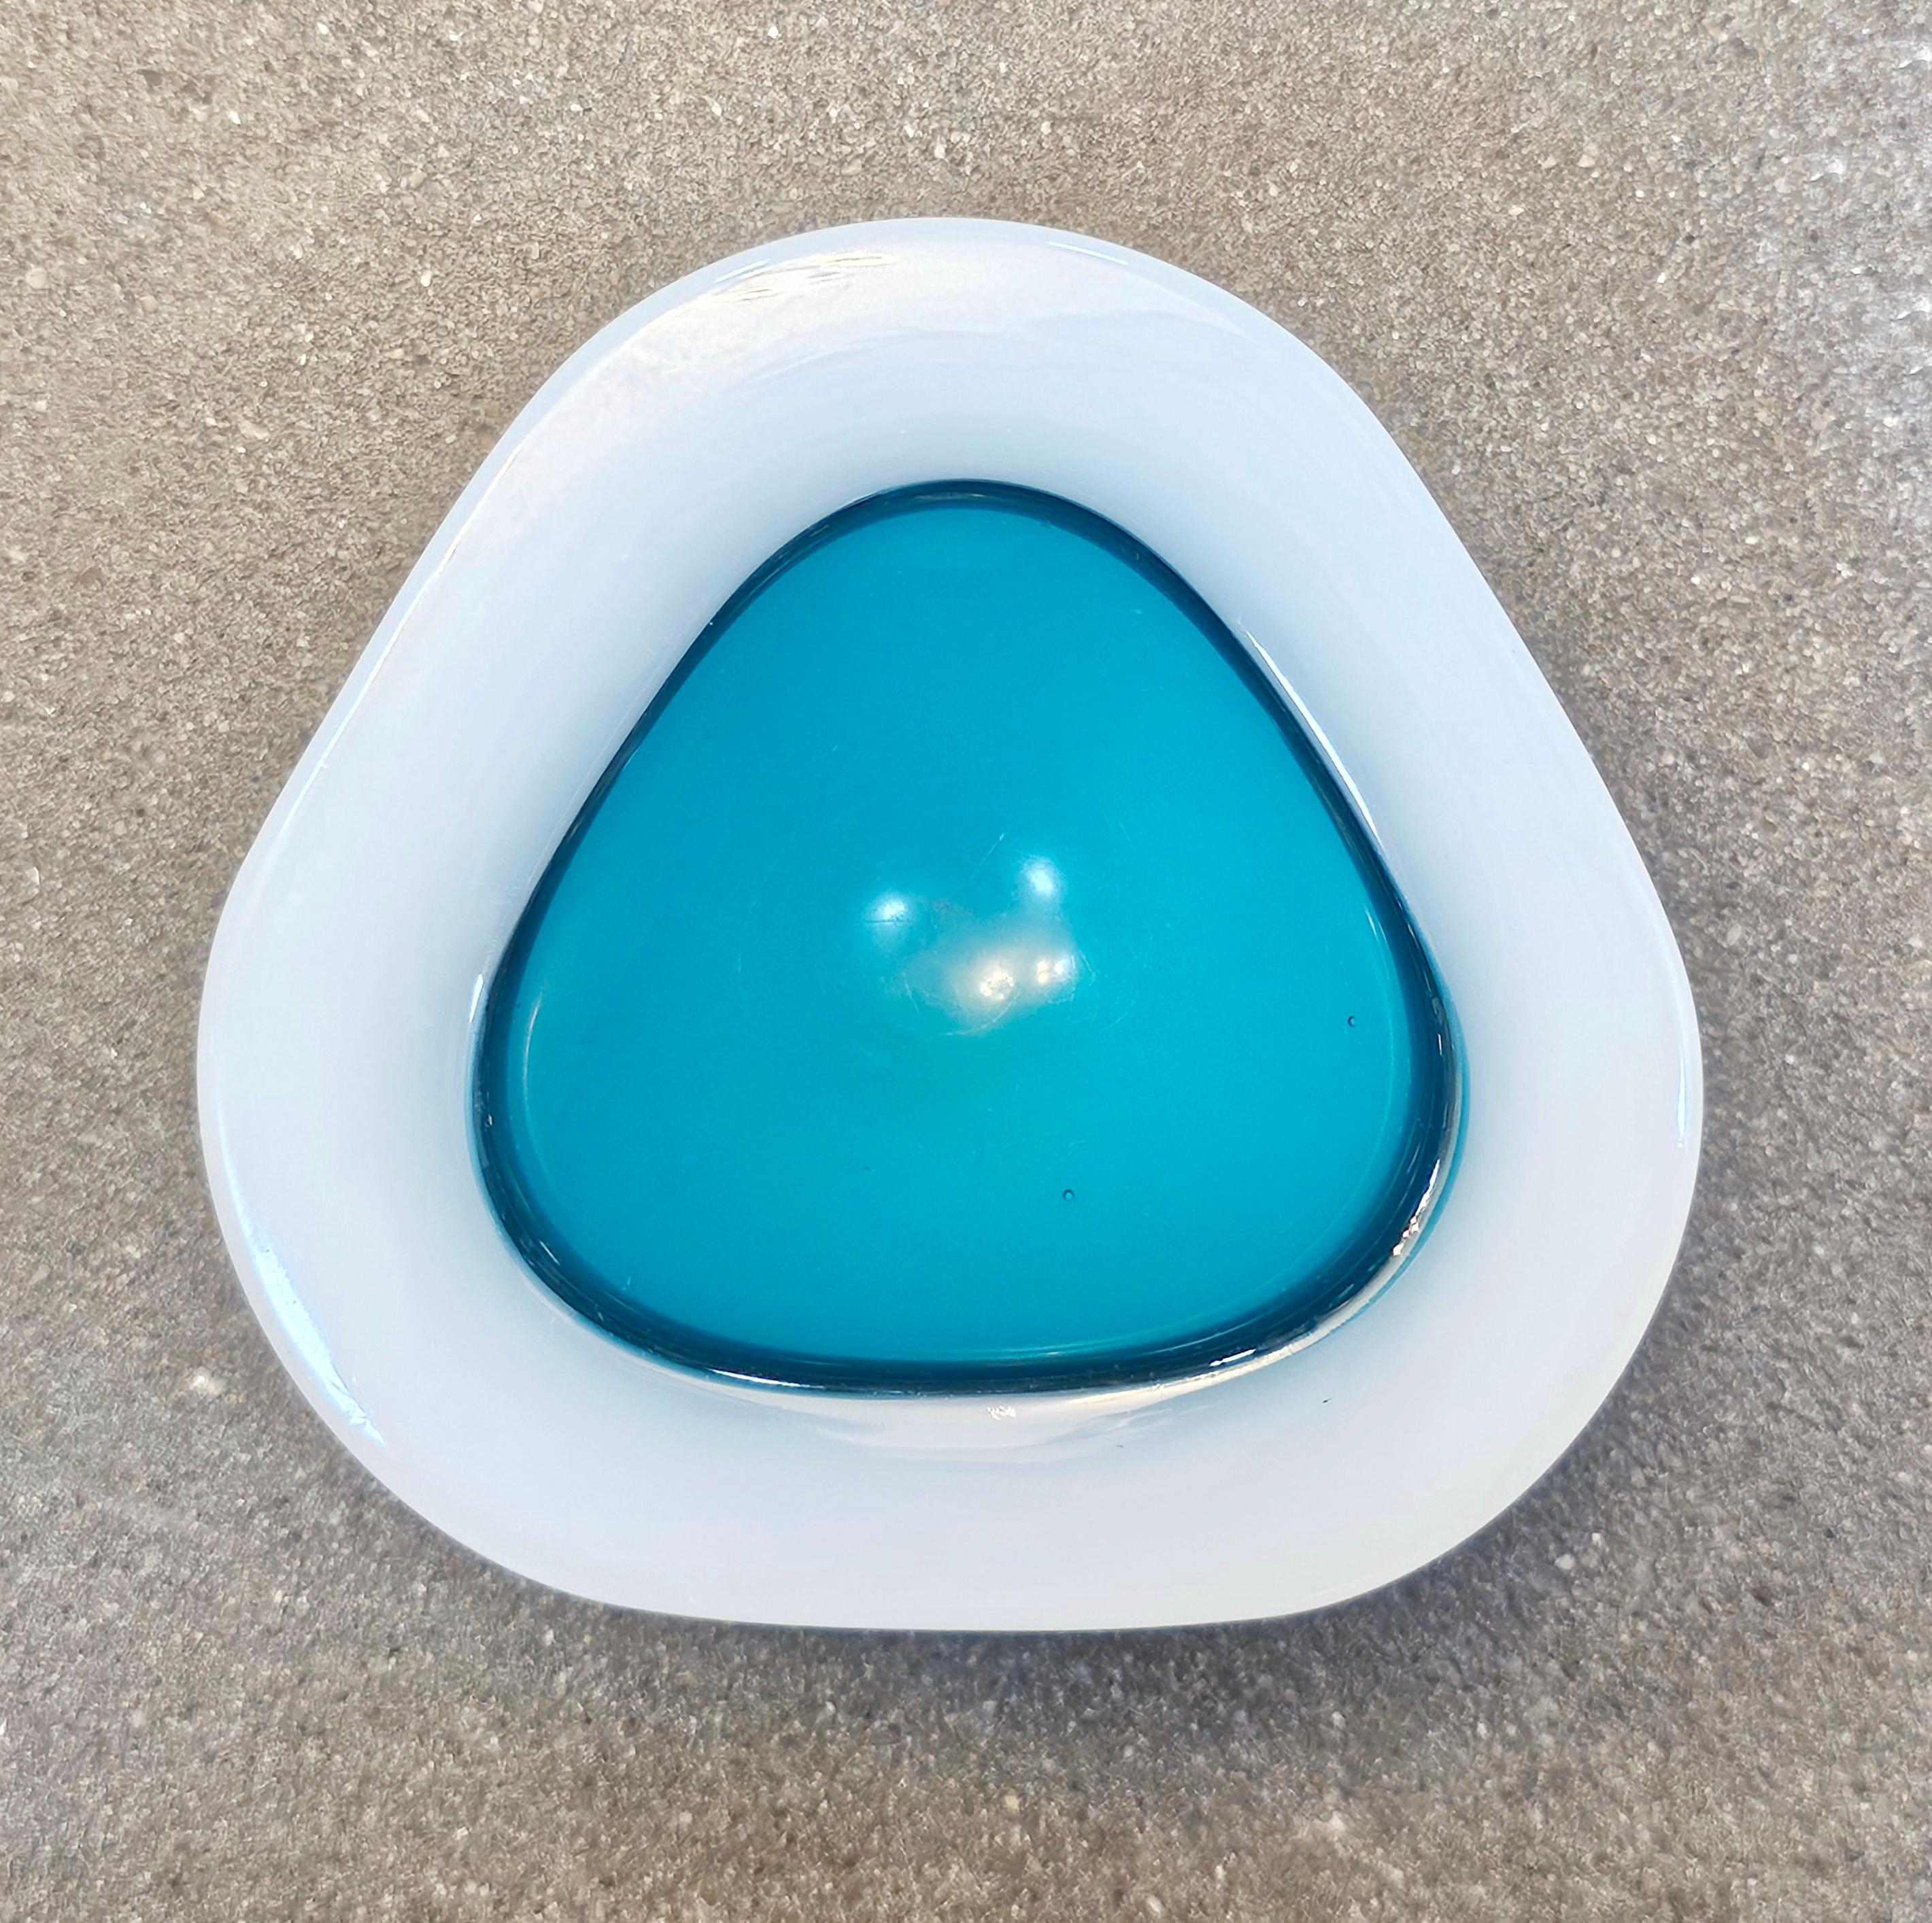 In this listing you will find a very rare Ashtray designed by Archimede Seguso in Opaline and Turquoise Murano Glass. It features beautiful triangular shape with round edges. Made in Italy in 1950s.

Ashtray is in a good vintage vintage condition